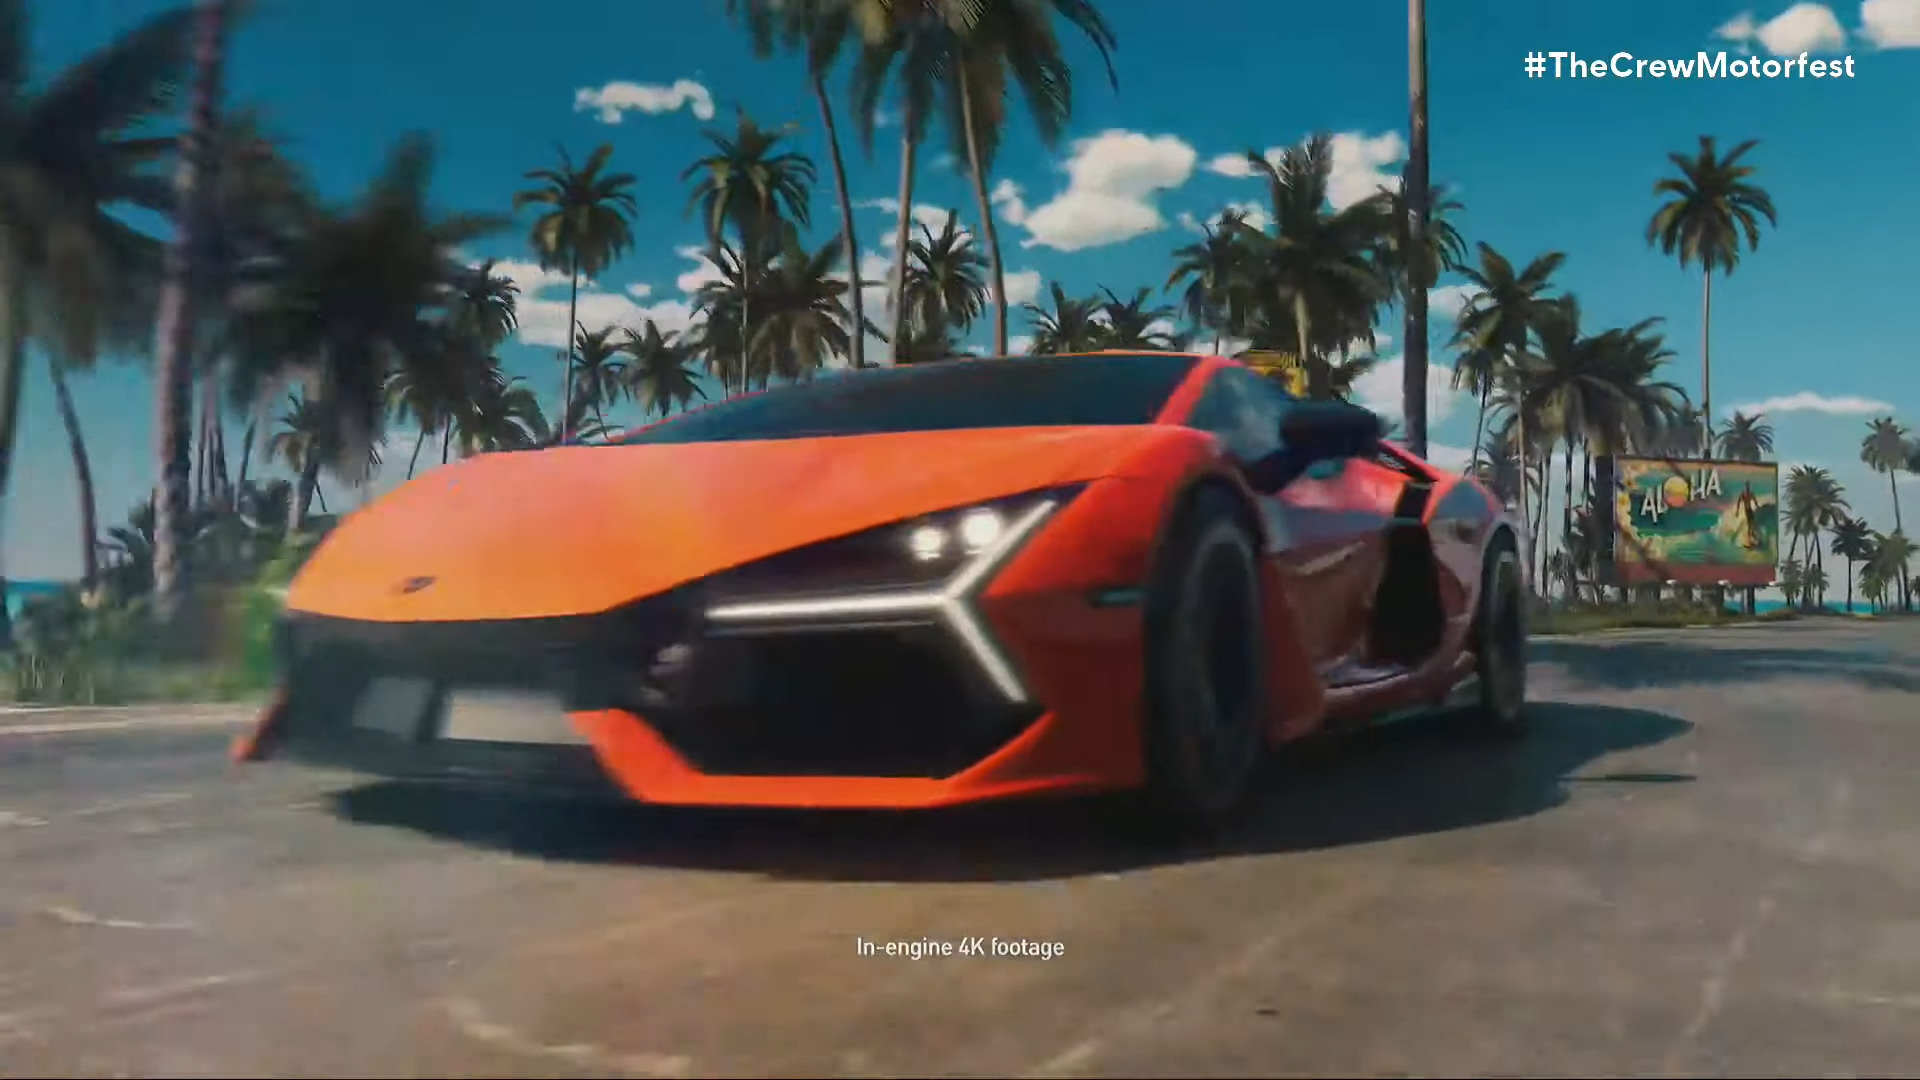 Ubisoft announces The Crew Motorfest, takes racers to Hawaii this